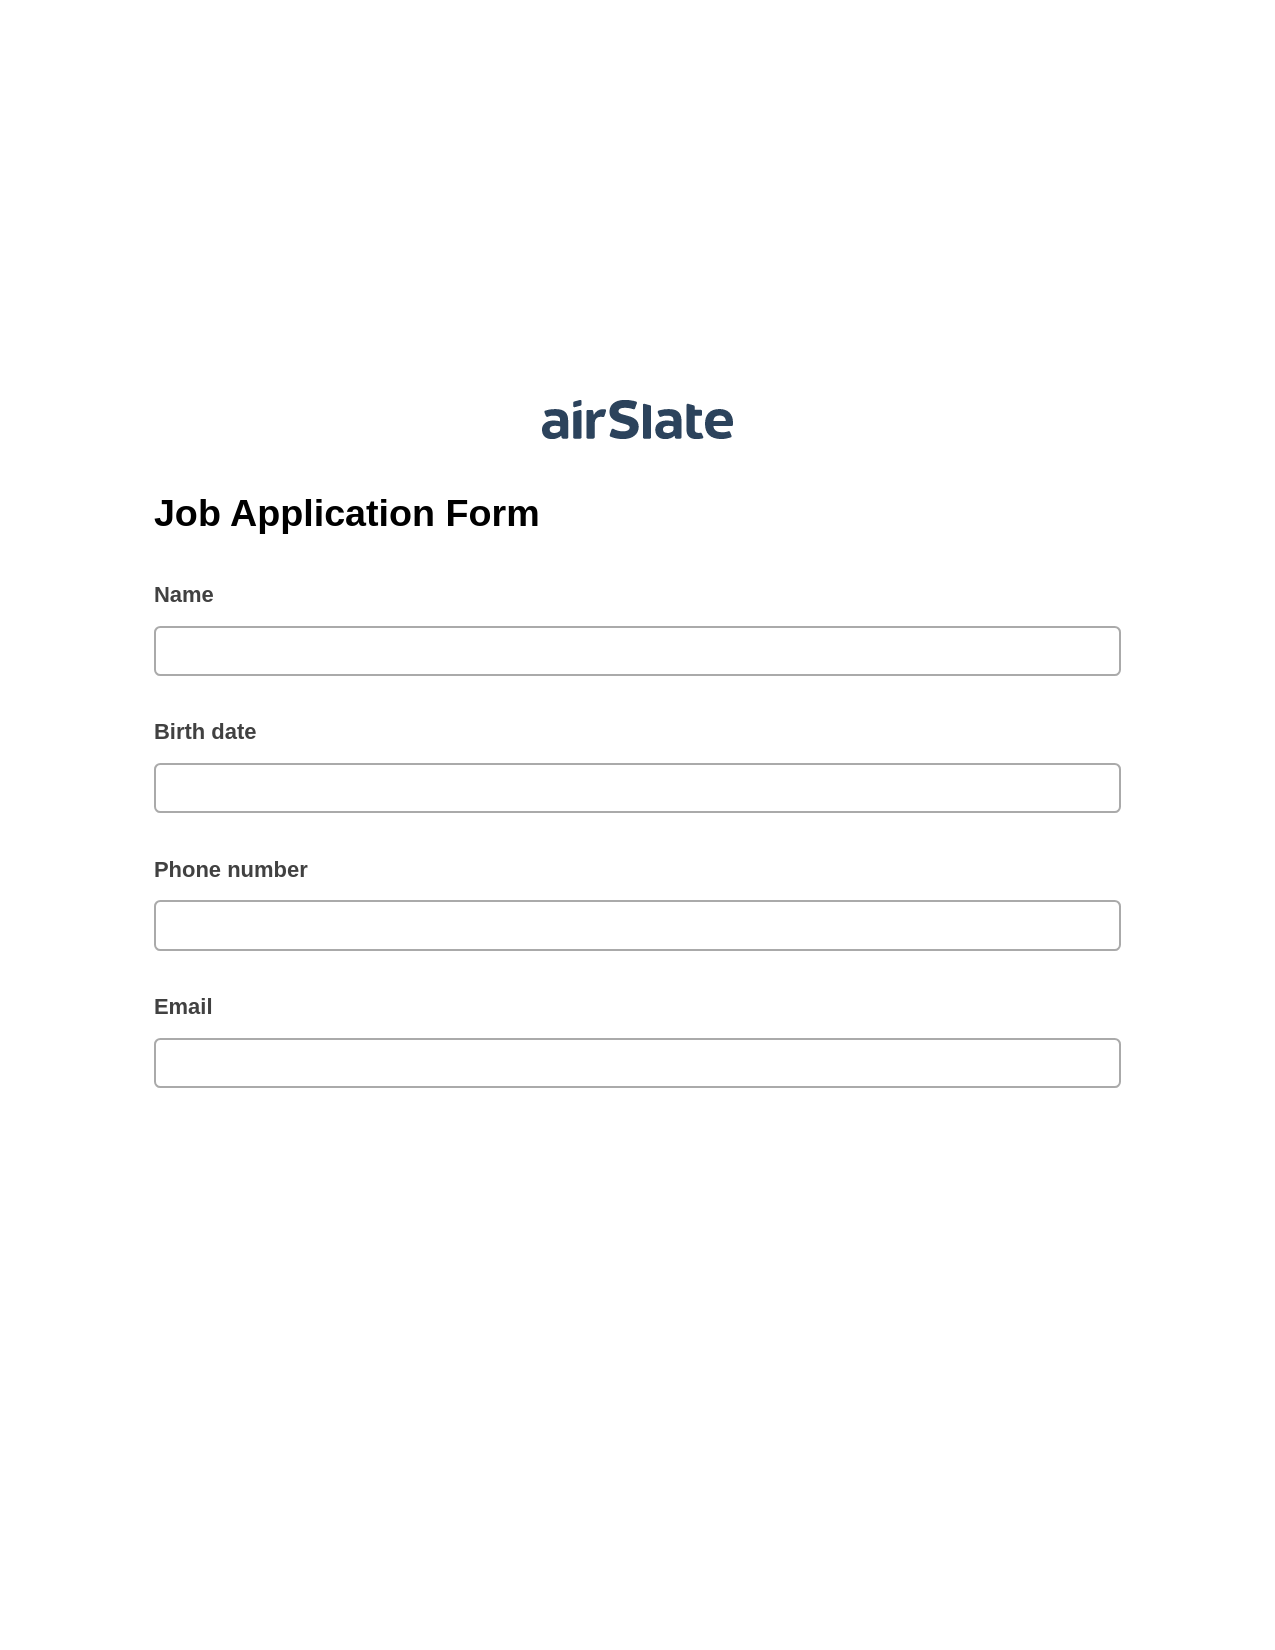 Multirole Job Application Form Pre-fill from Excel Spreadsheet Dropdown Options Bot, Update NetSuite Records Bot, Archive to SharePoint Folder Bot